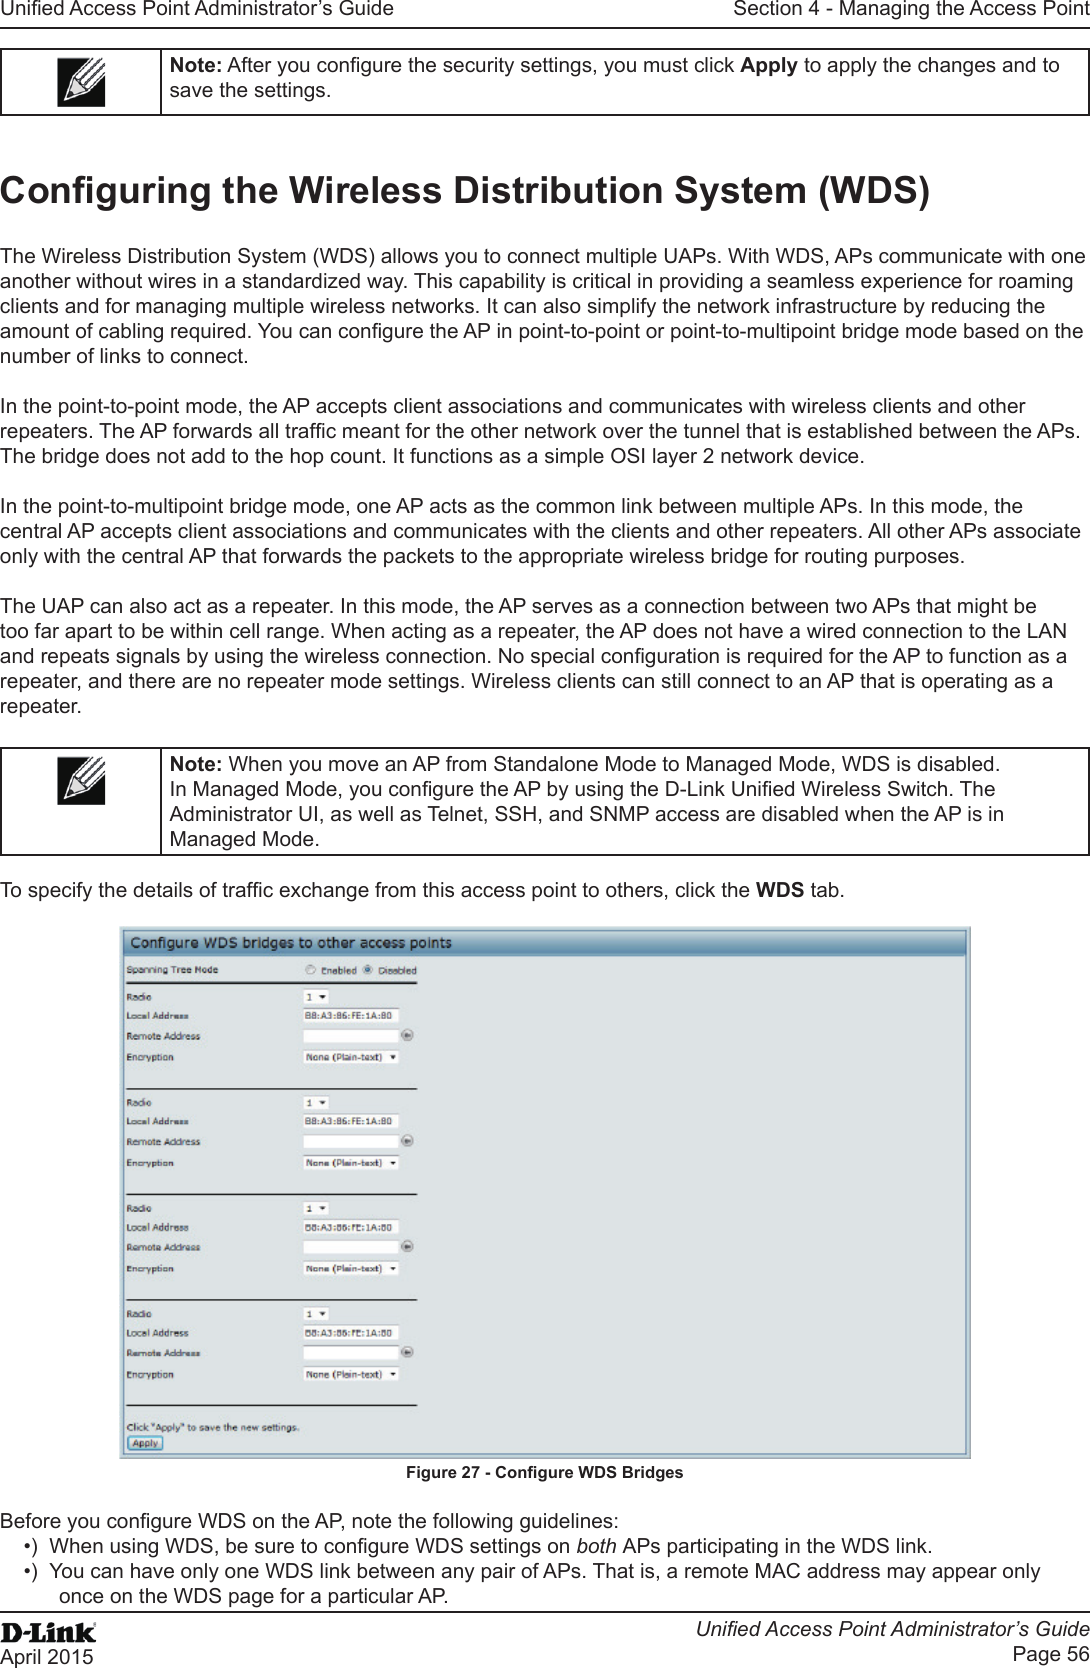 Unied Access Point Administrator’s GuideUnied Access Point Administrator’s GuidePage 56April 2015Section 4 - Managing the Access PointNote: After you congure the security settings, you must click Apply to apply the changes and to save the settings.Conguring the Wireless Distribution System (WDS)The Wireless Distribution System (WDS) allows you to connect multiple UAPs. With WDS, APs communicate with one another without wires in a standardized way. This capability is critical in providing a seamless experience for roaming clients and for managing multiple wireless networks. It can also simplify the network infrastructure by reducing the amount of cabling required. You can congure the AP in point-to-point or point-to-multipoint bridge mode based on the number of links to connect.In the point-to-point mode, the AP accepts client associations and communicates with wireless clients and other repeaters. The AP forwards all trafc meant for the other network over the tunnel that is established between the APs. The bridge does not add to the hop count. It functions as a simple OSI layer 2 network device.In the point-to-multipoint bridge mode, one AP acts as the common link between multiple APs. In this mode, the central AP accepts client associations and communicates with the clients and other repeaters. All other APs associate only with the central AP that forwards the packets to the appropriate wireless bridge for routing purposes.The UAP can also act as a repeater. In this mode, the AP serves as a connection between two APs that might be too far apart to be within cell range. When acting as a repeater, the AP does not have a wired connection to the LAN and repeats signals by using the wireless connection. No special conguration is required for the AP to function as a repeater, and there are no repeater mode settings. Wireless clients can still connect to an AP that is operating as a repeater.Note: When you move an AP from Standalone Mode to Managed Mode, WDS is disabled. In Managed Mode, you congure the AP by using the D-Link Unied Wireless Switch. The Administrator UI, as well as Telnet, SSH, and SNMP access are disabled when the AP is in Managed Mode.To specify the details of trafc exchange from this access point to others, click the WDS tab.Figure 27 - Congure WDS BridgesBefore you congure WDS on the AP, note the following guidelines:•)  When using WDS, be sure to congure WDS settings on both APs participating in the WDS link.•)  You can have only one WDS link between any pair of APs. That is, a remote MAC address may appear only once on the WDS page for a particular AP.